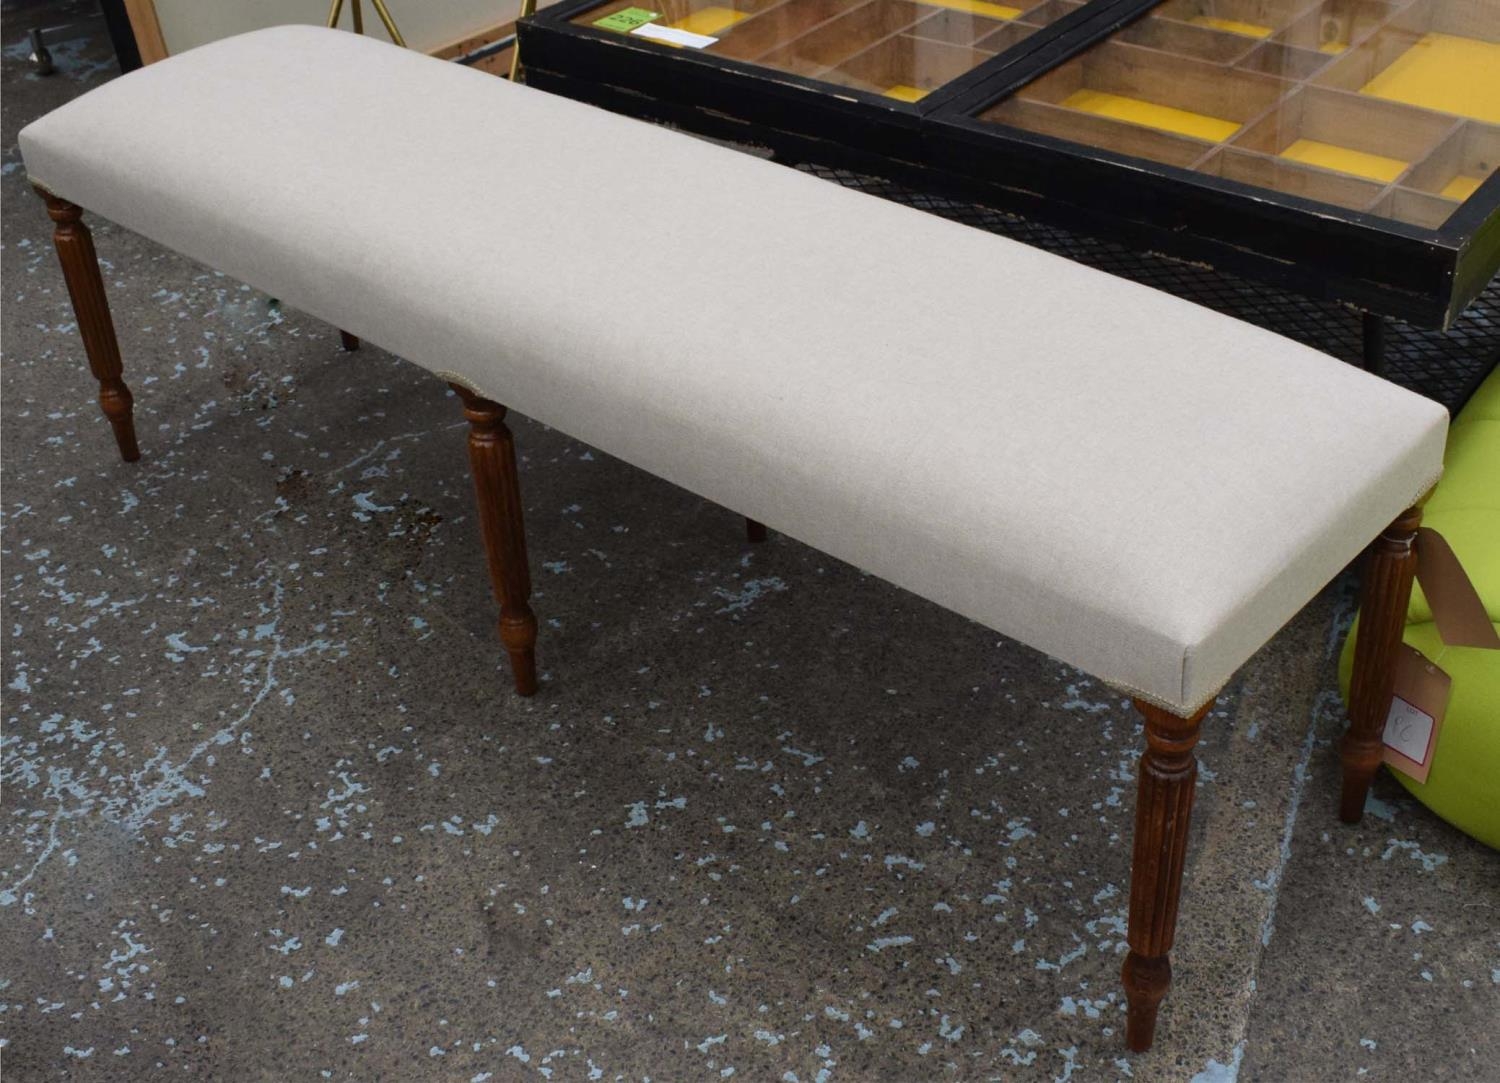 HALL SEAT, 151cm L x 47cm H x 40cm D, with linen upholstery. - Image 3 of 8